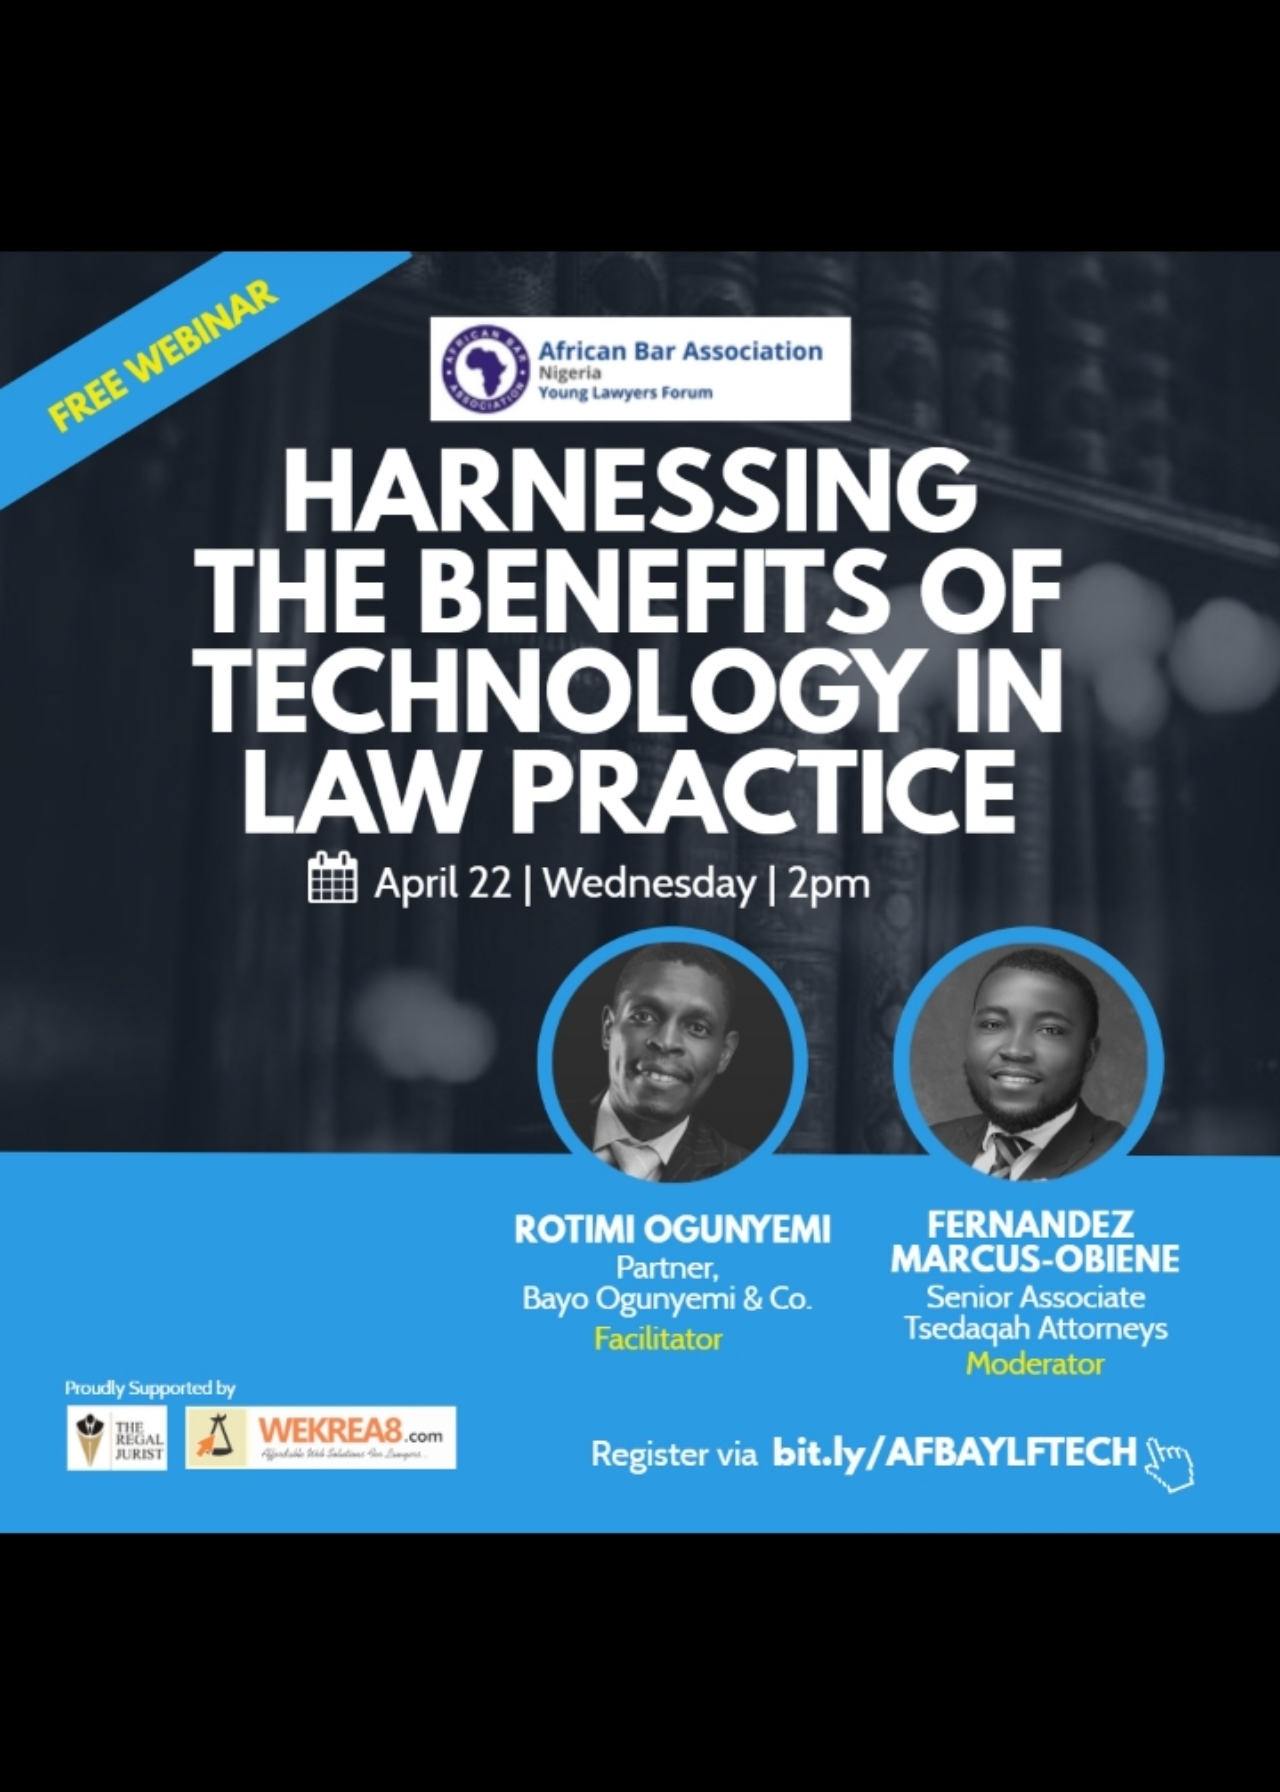 “Harnessing the benefits of technology in law practice”- AFBA YLF NG to hold third webinar session